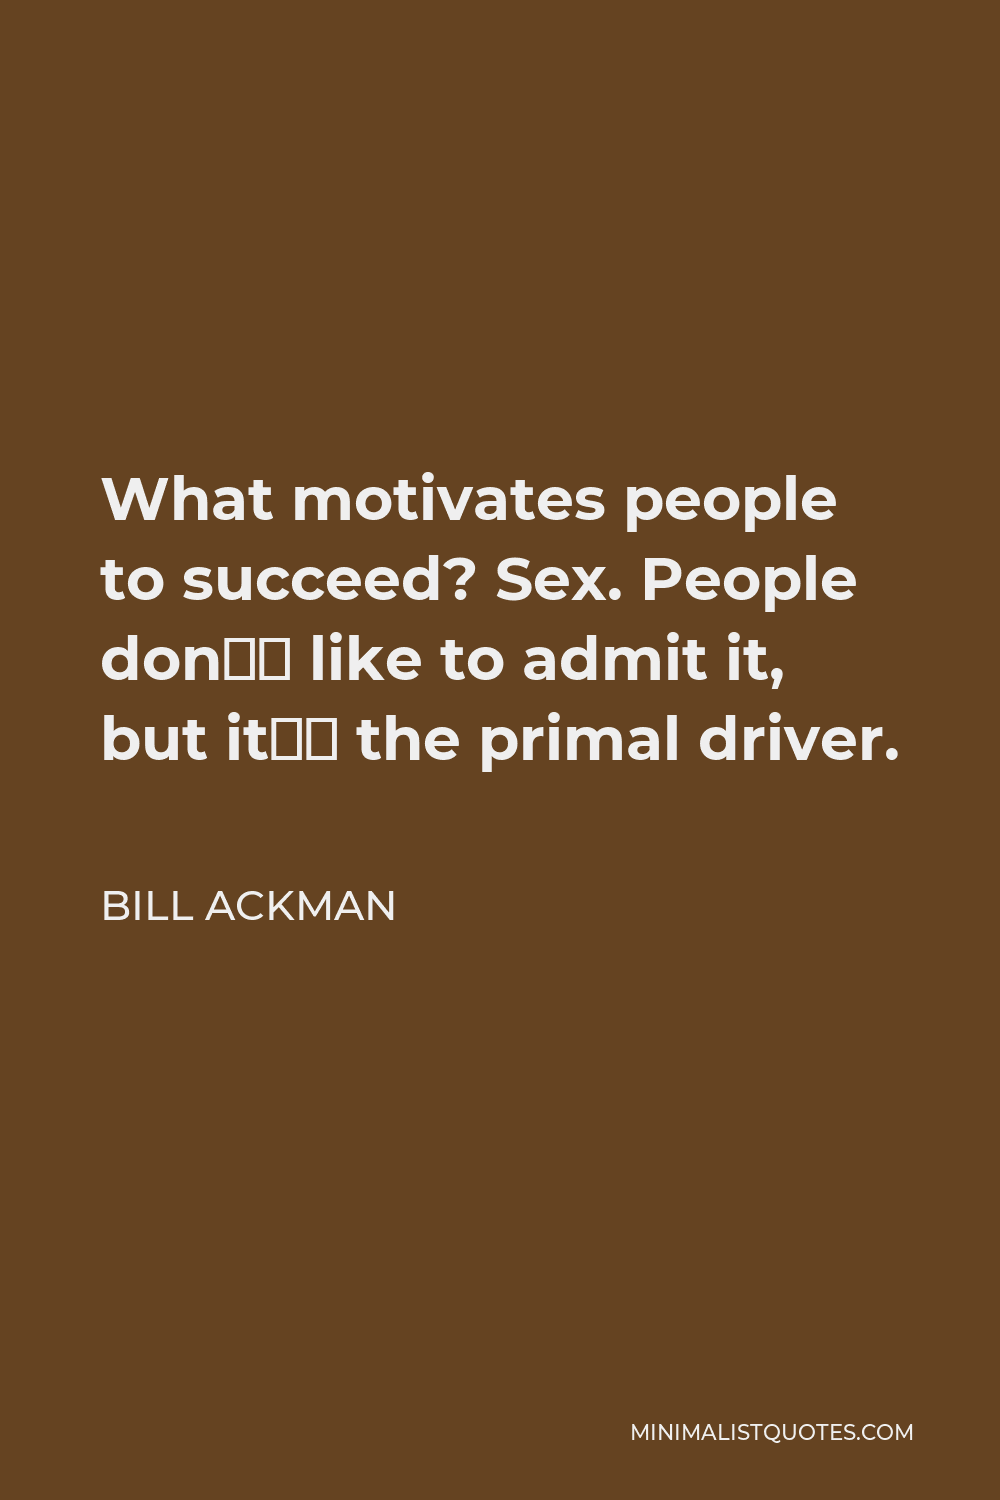 Bill Ackman Quote - What motivates people to succeed? Sex. People don’t like to admit it, but it’s the primal driver.